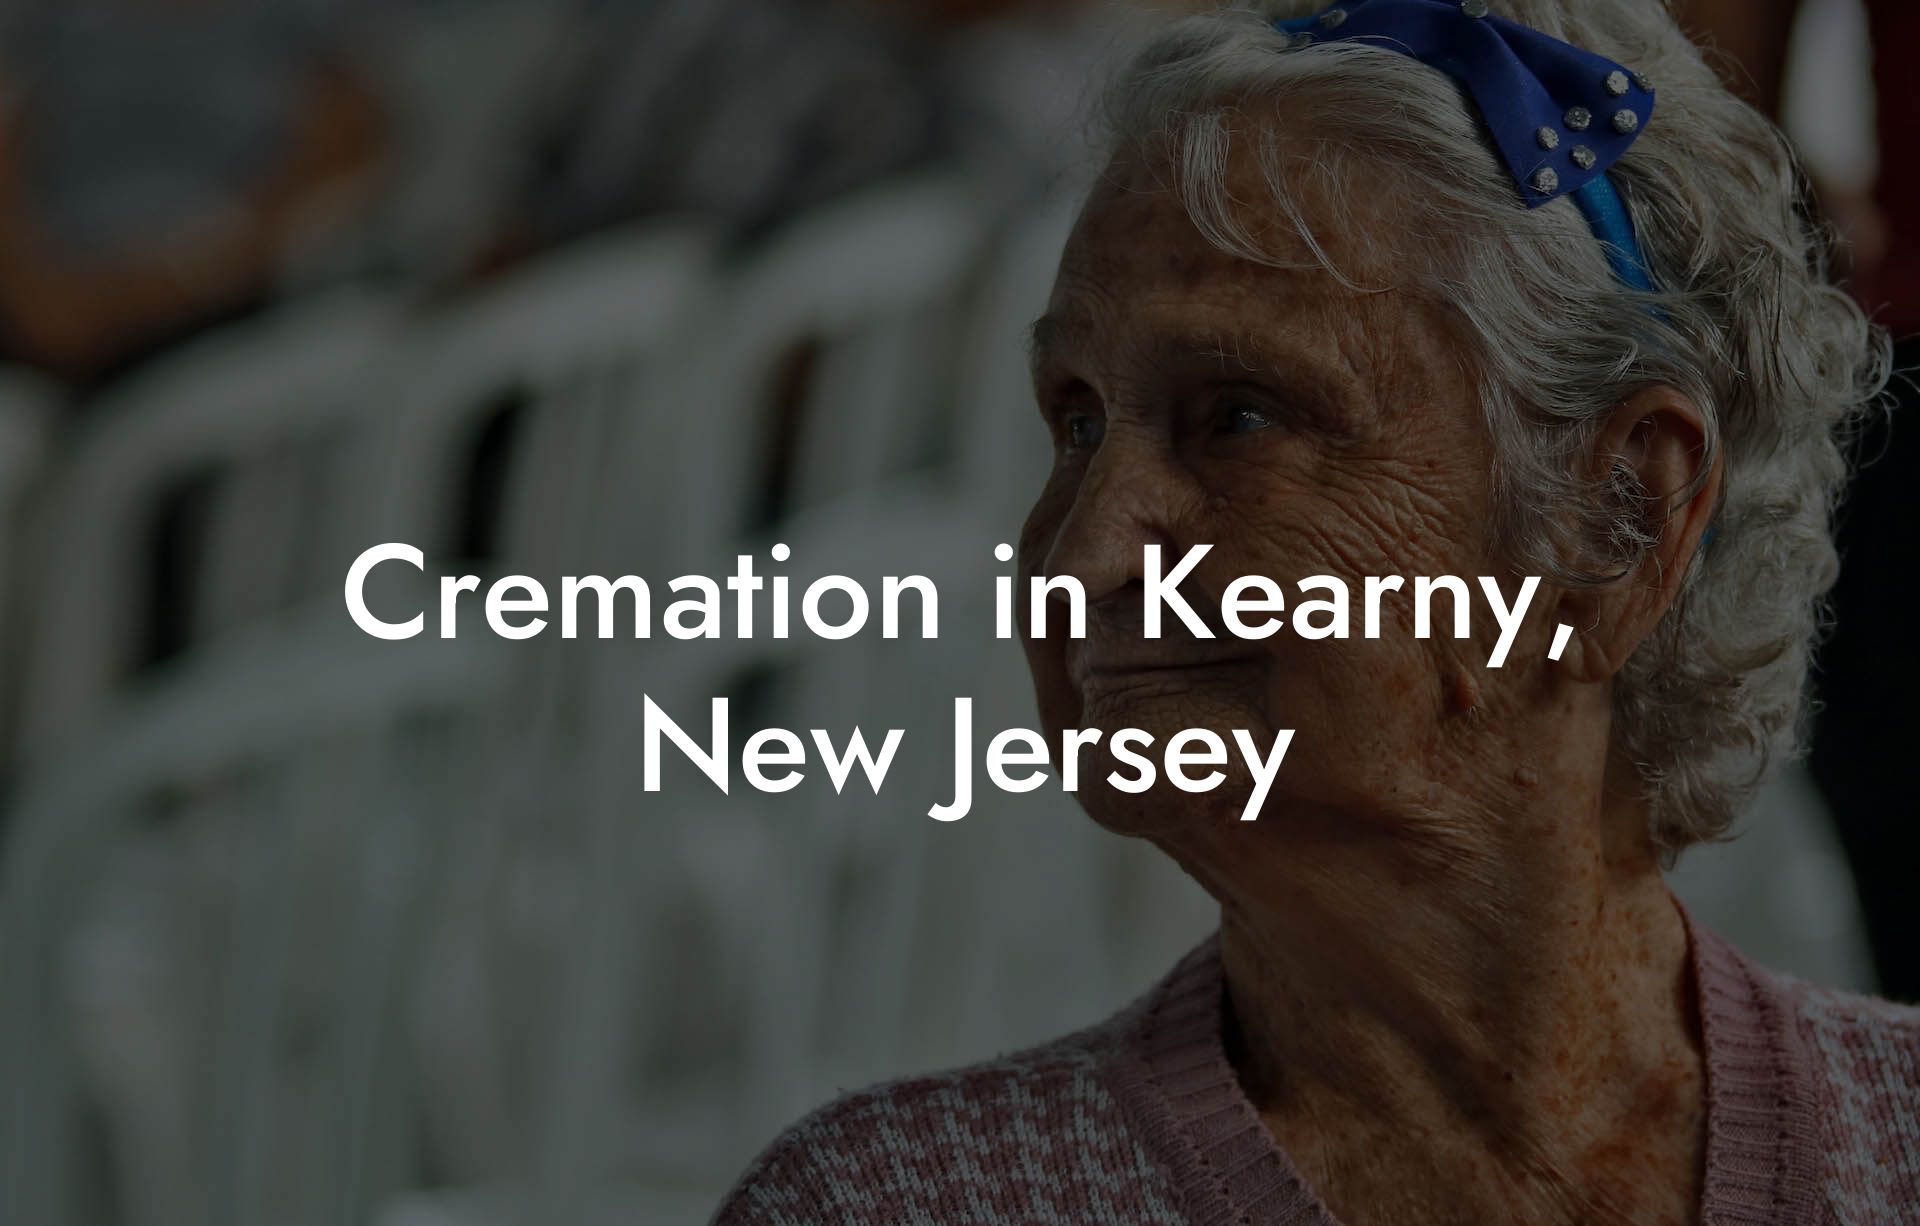 Cremation in Kearny, New Jersey